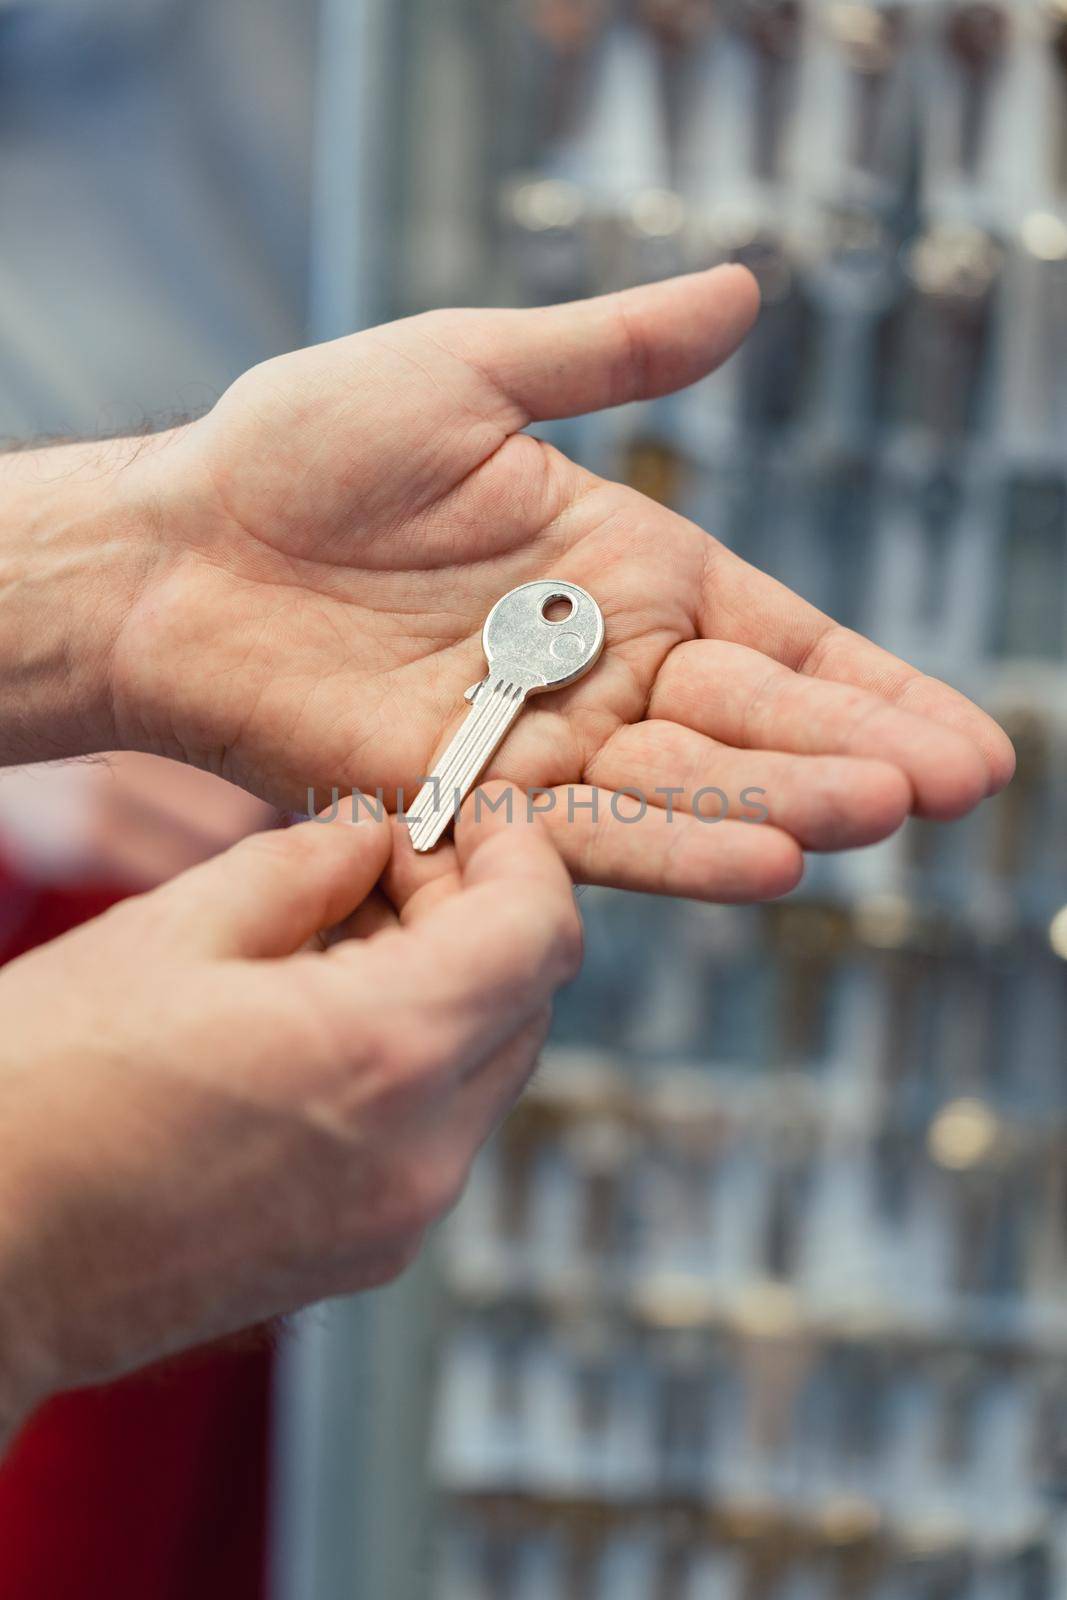 Locksmith showing key blanks in his shop